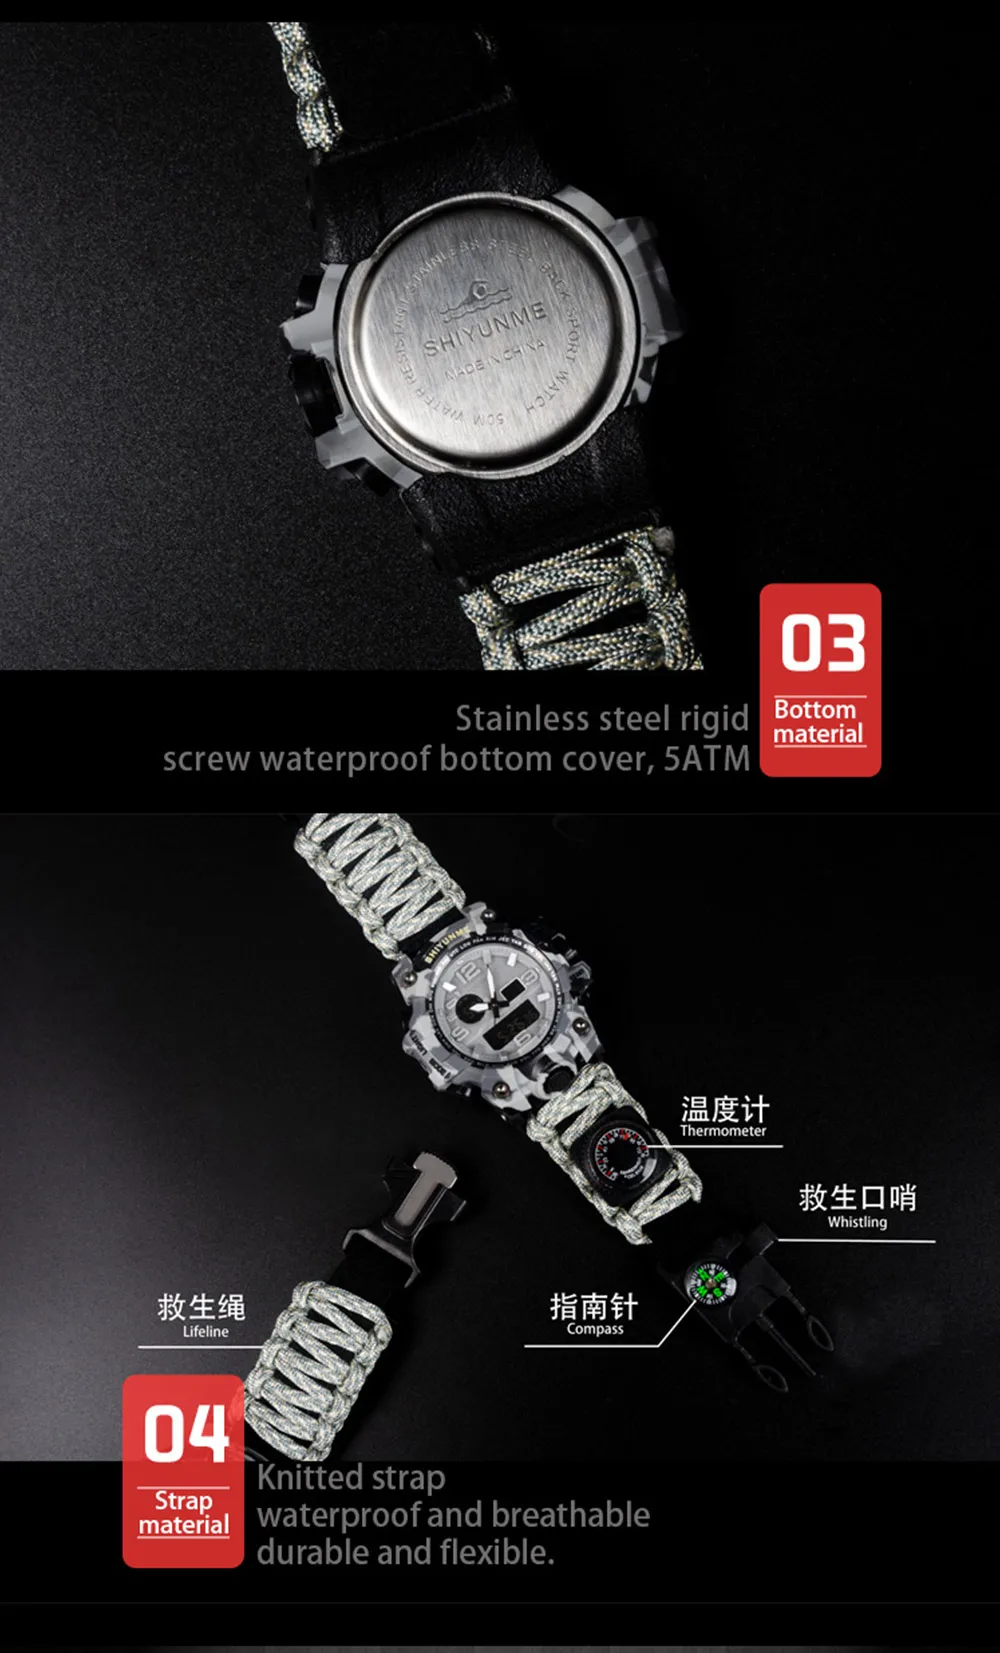 Men Camouflage Military Sports Digital Watches Compass Outdoor Survival Multi-function Waterproof Men's Watch Relogio Masculino